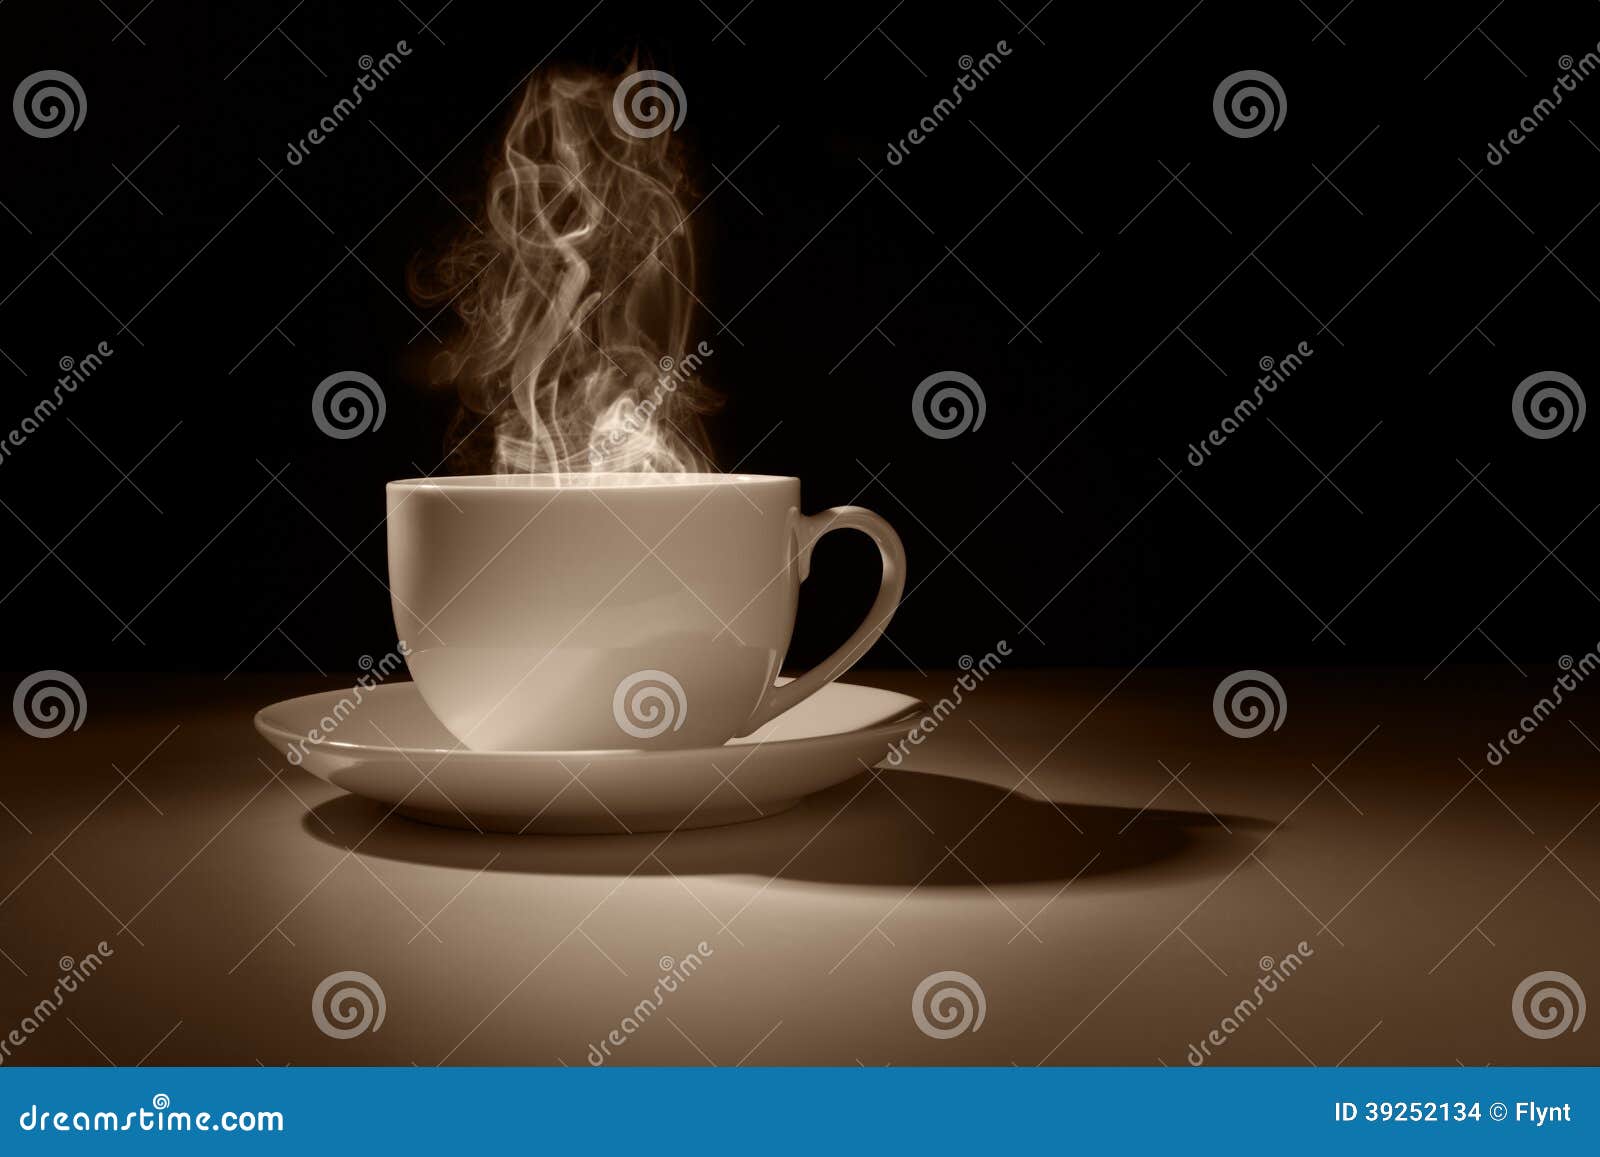 hot cup of coffee or tea